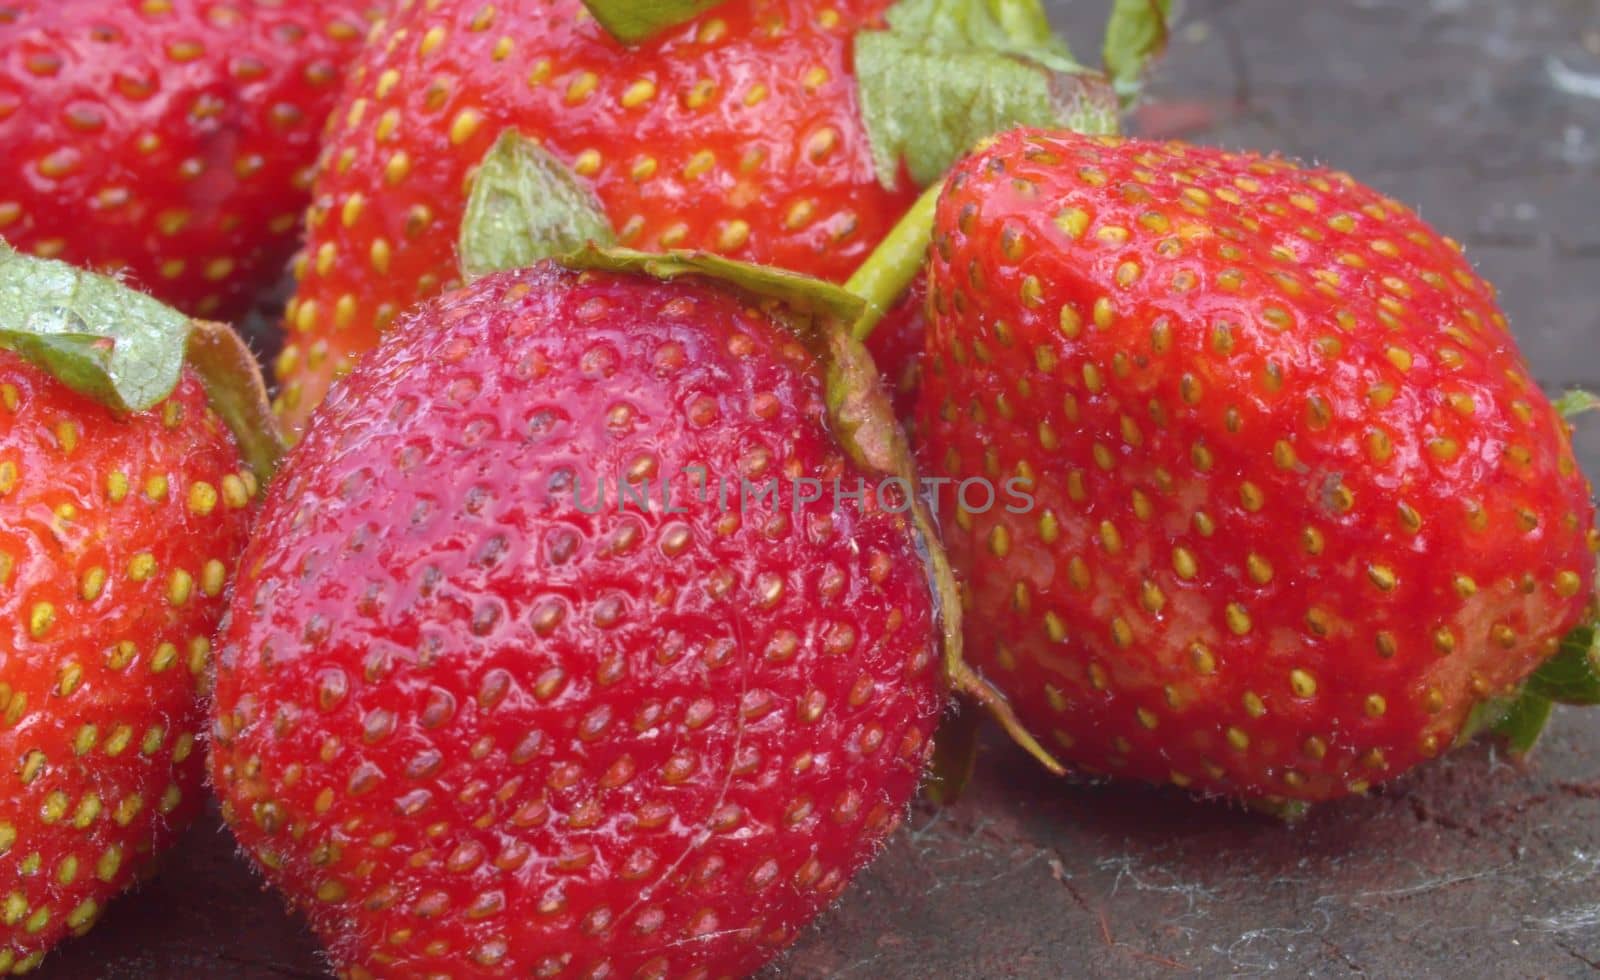 Ripe strawberries on a wooden board by Alize